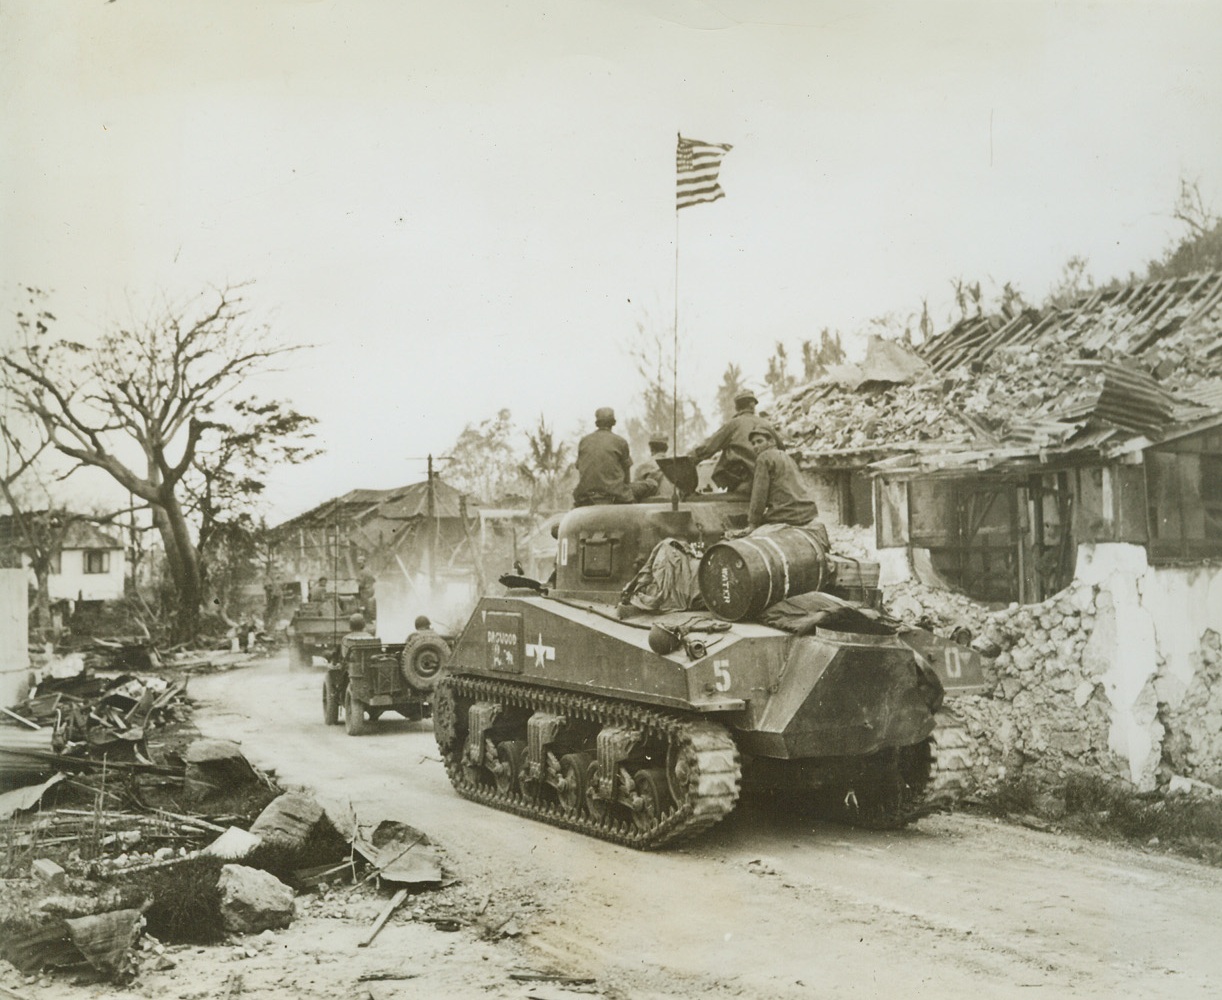 Old Glory Moves Up to Battle, 8/11/1944. GANA, GUAM – Moving through the war-shattered town of Agana, tanks and armored vehicles of the Third  U.S. Marine Division roll to the North on the hells of retreating Japs. They carry with them the American flag, to wave once again over the island that was seized by the Japs shortly after Pearl Harbor. Credit: ACME;